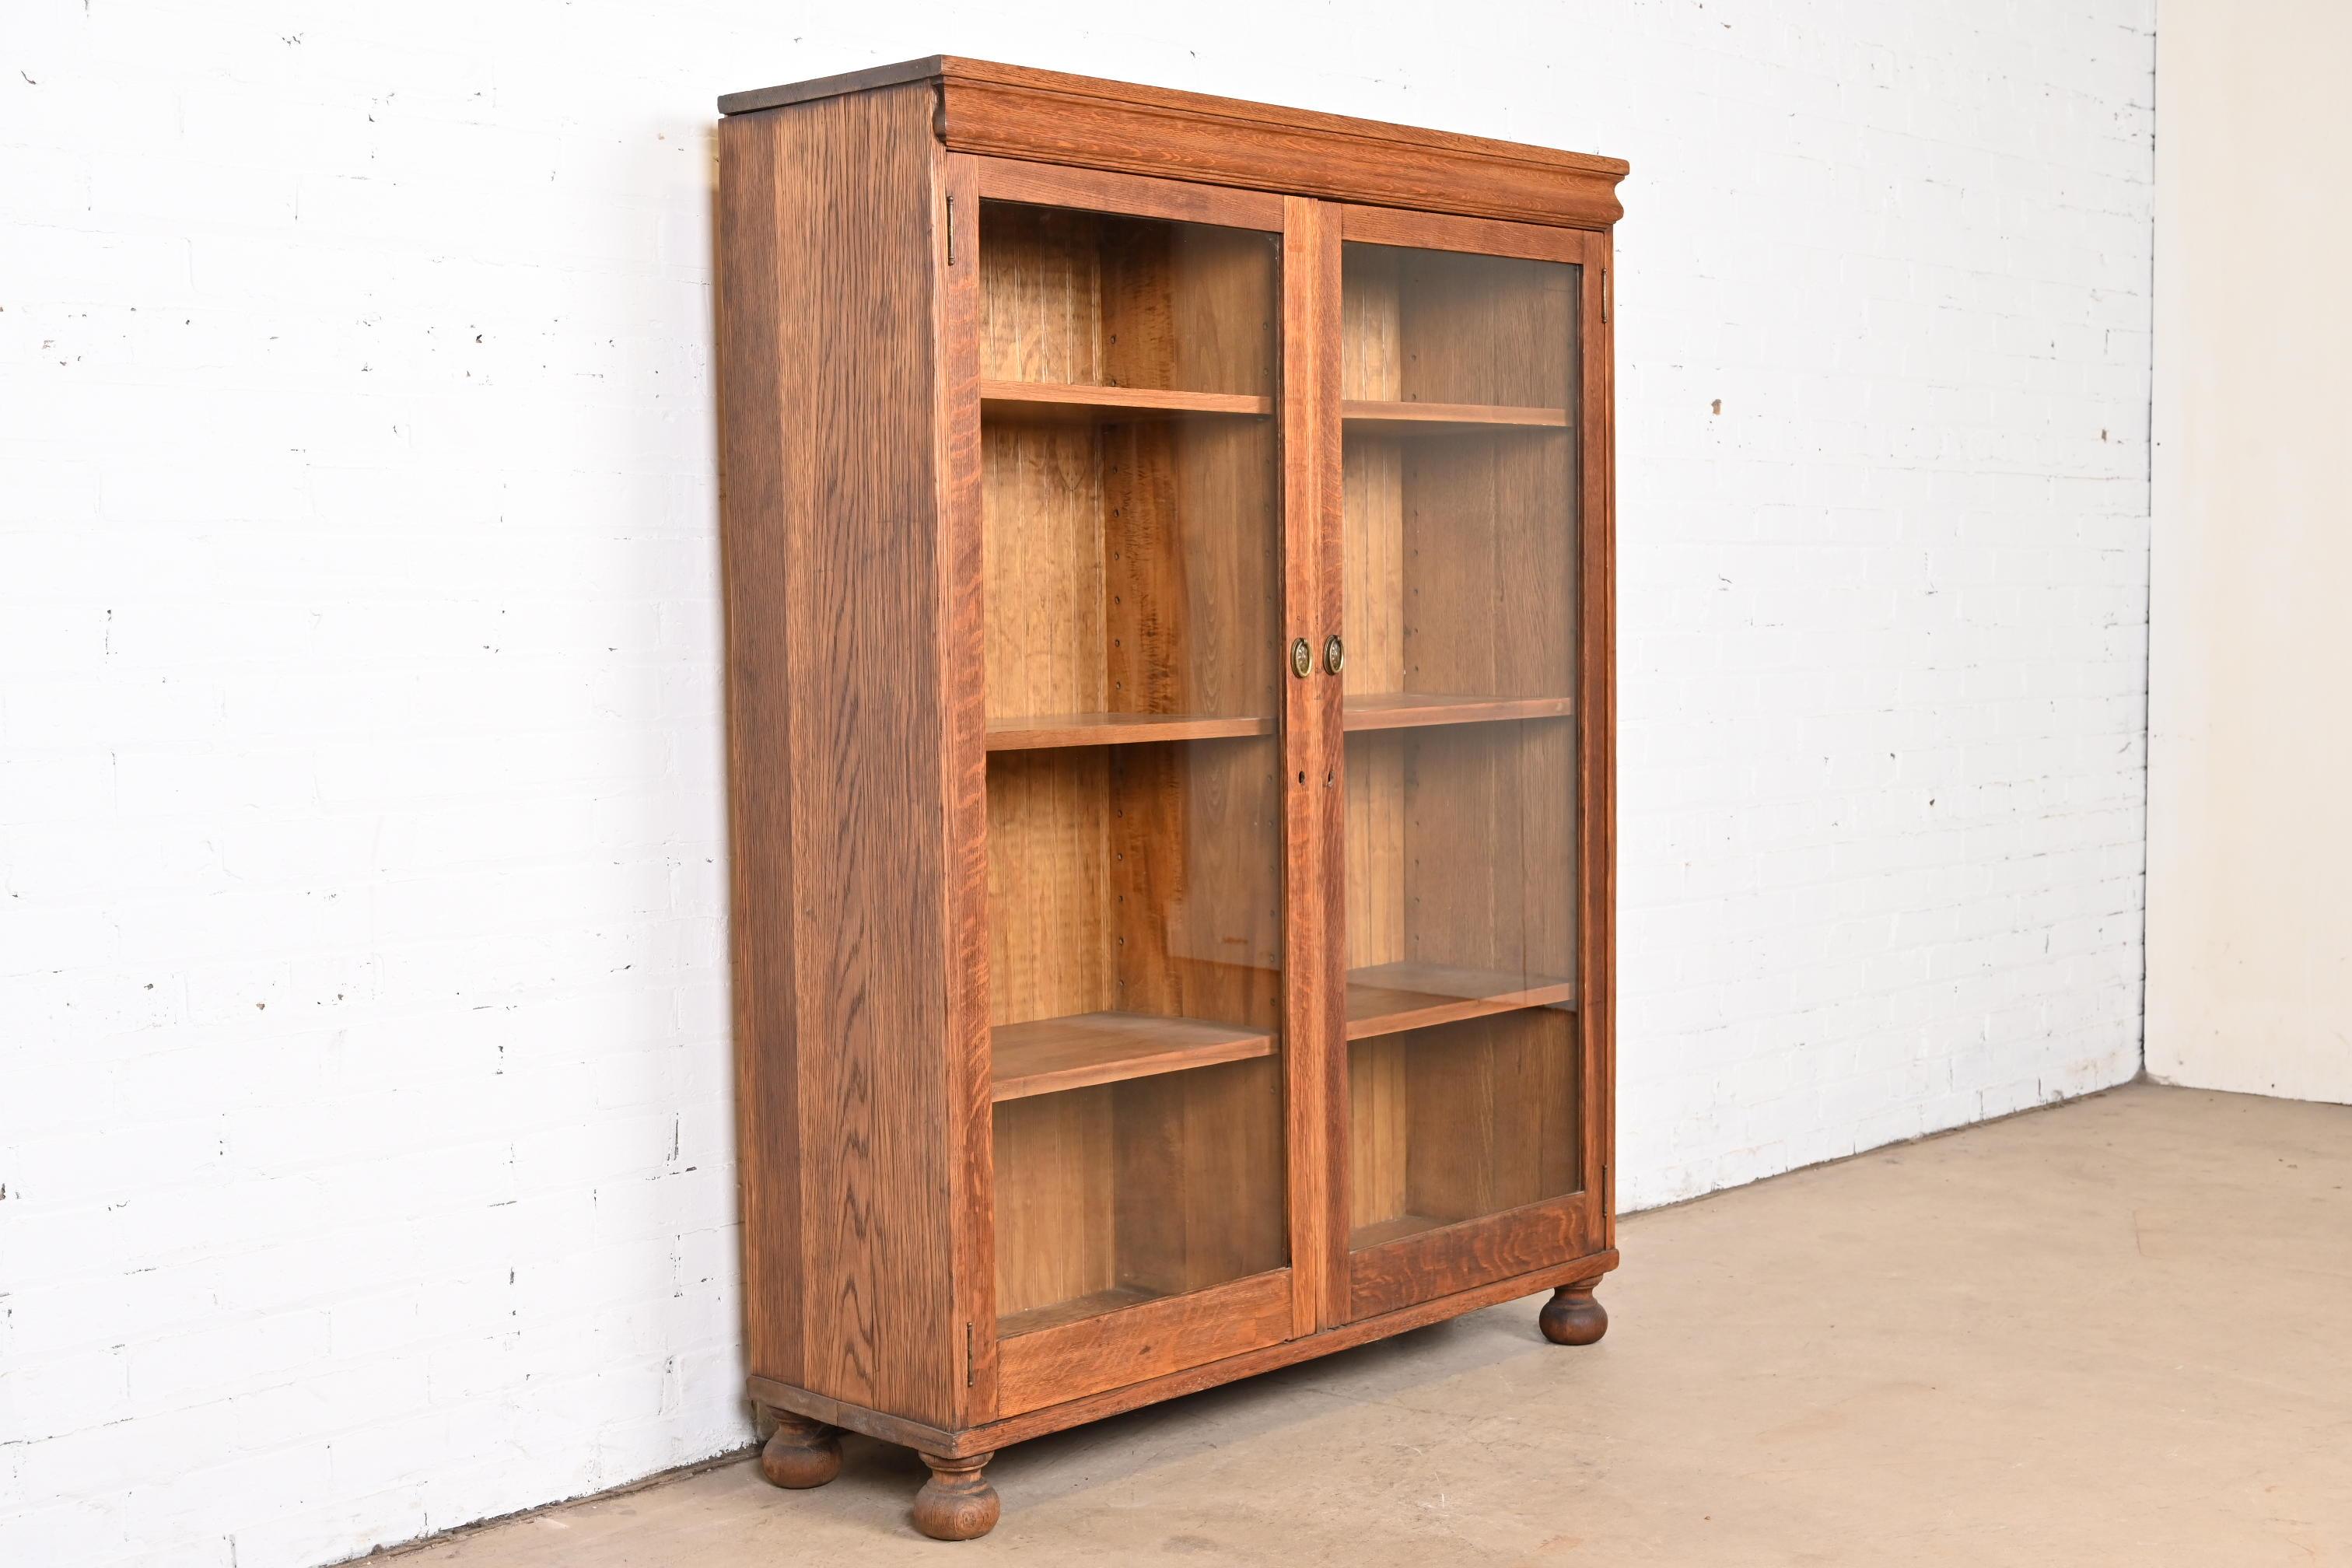 American Antique Stickley Style Arts & Crafts Oak Glass Front Double Bookcase, Circa 1900 For Sale